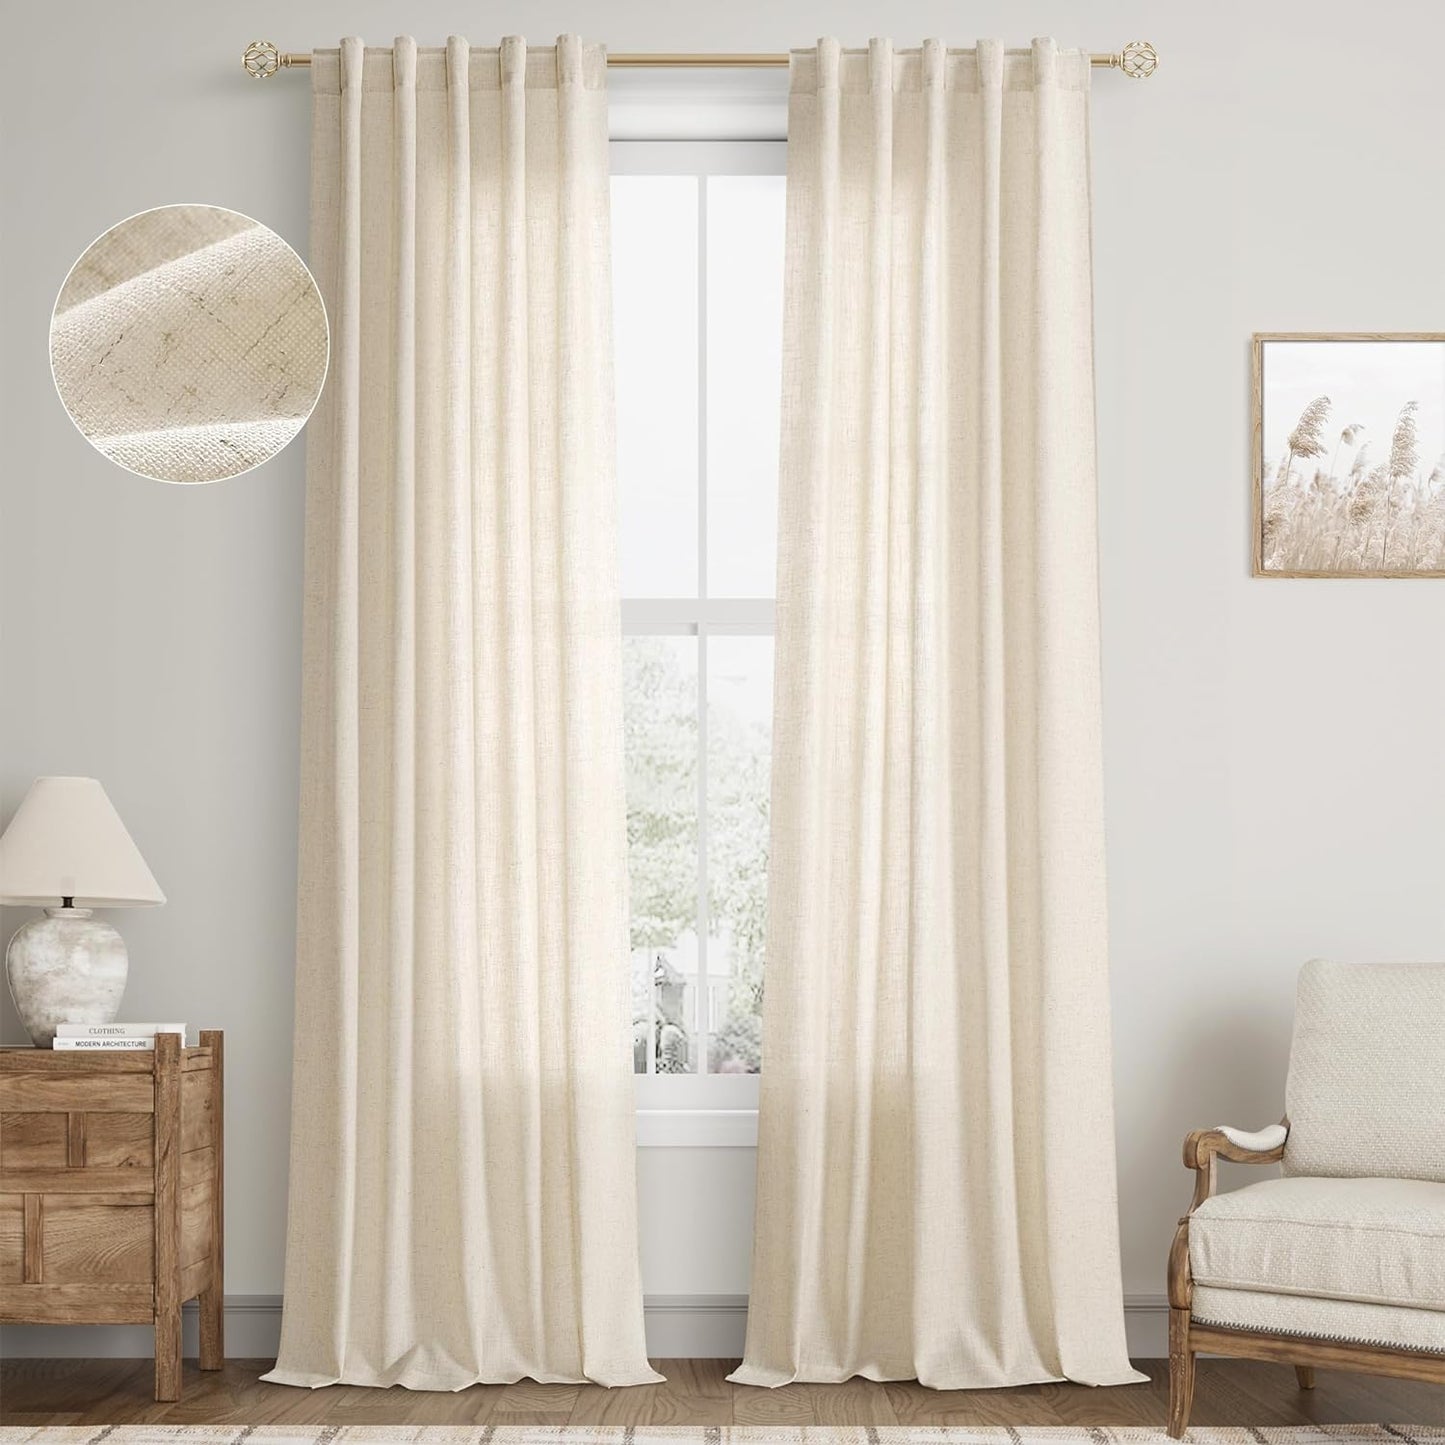 Natural Linen Sheer Curtains 84 Inch Long for Living Room Bedroom Back Tab Light Filtering Privacy Farmhouse Rod Pocket Ivory off White Neutral Drapes with Hooks 2 Panels Cream Beige  SPWIY Cream Beige 40W X 90L Inch X 2 Panels 